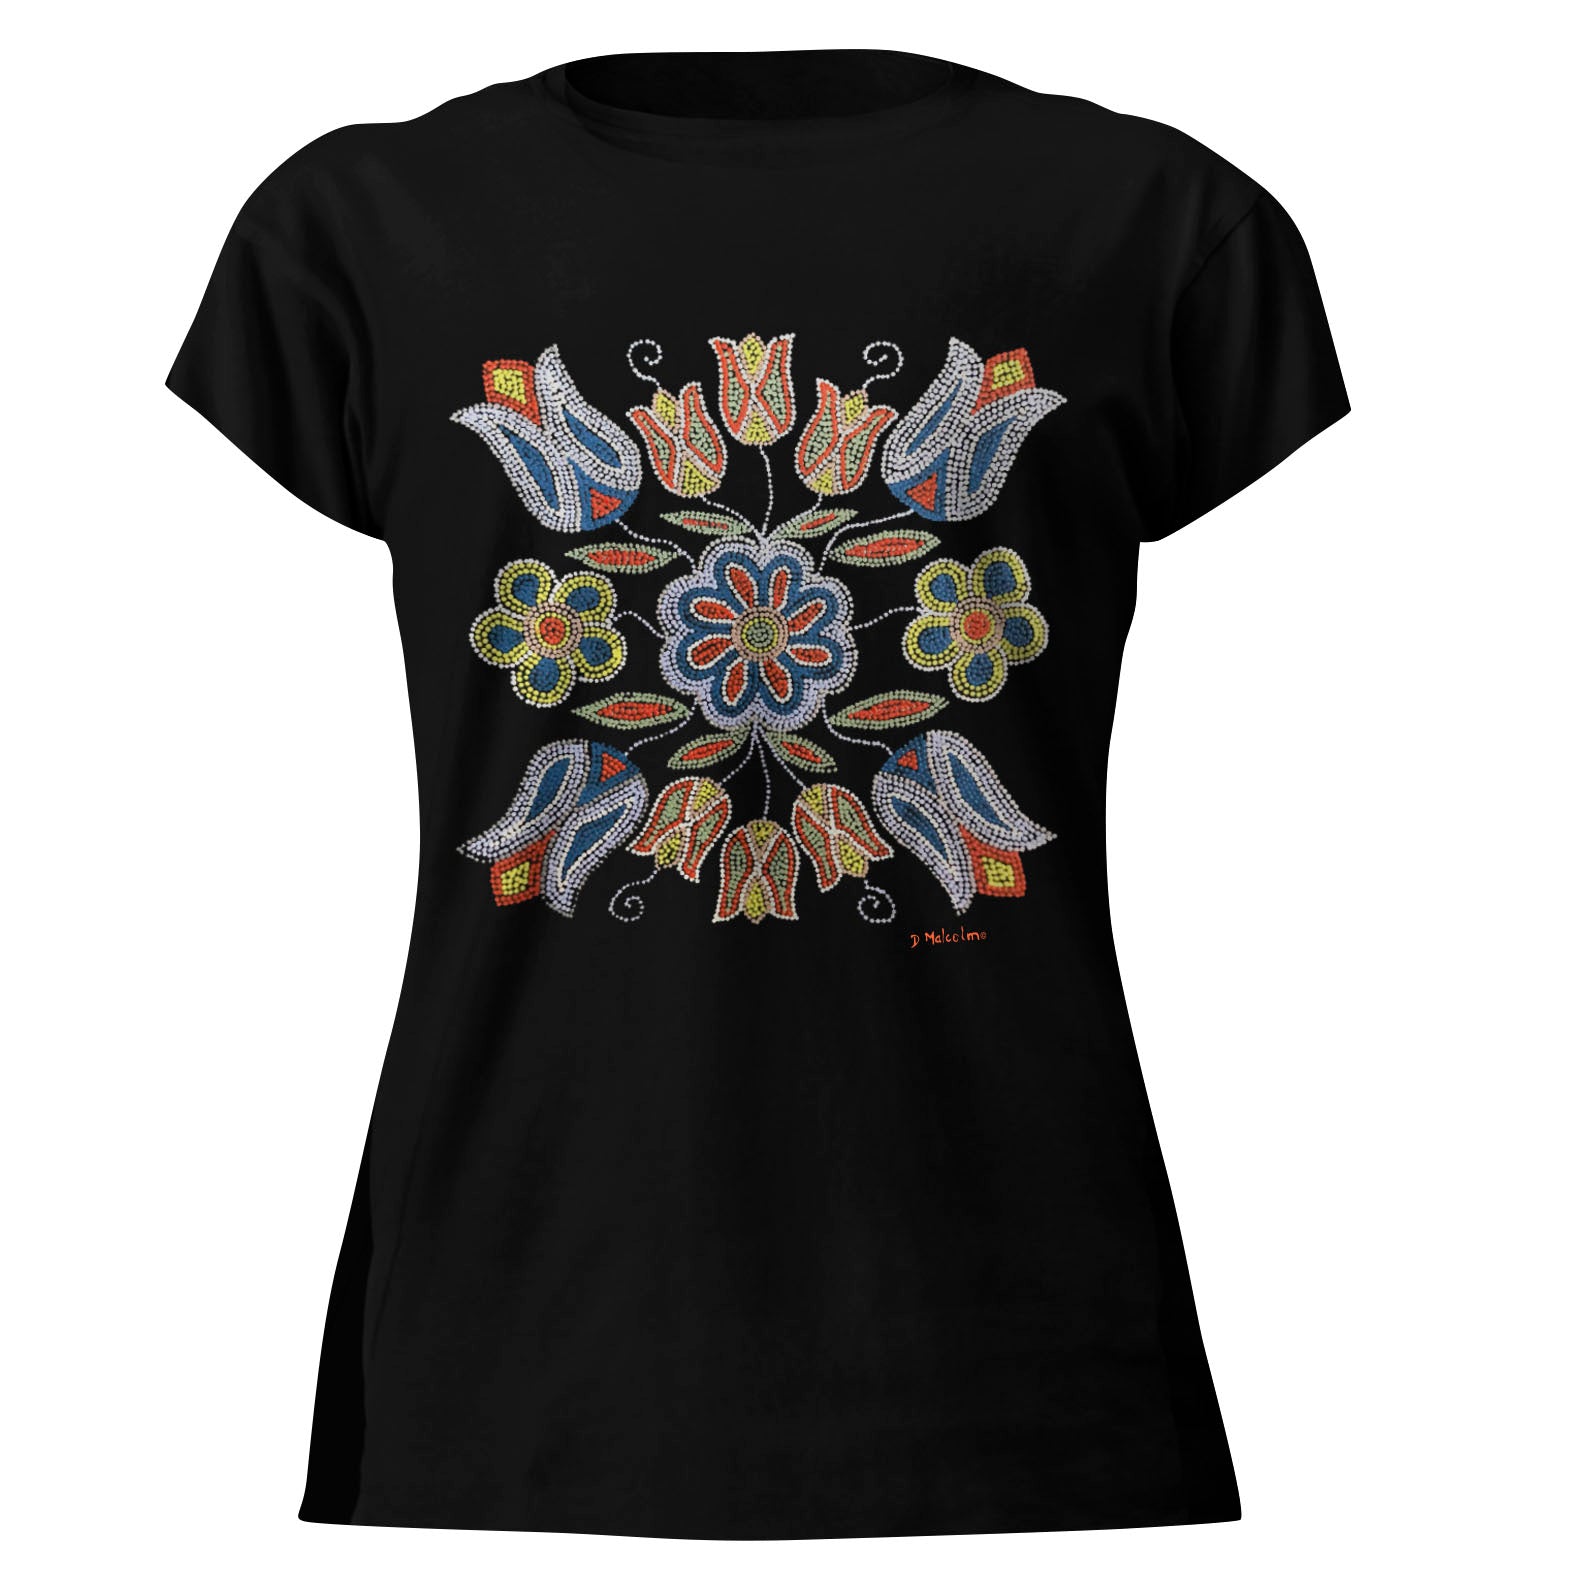 Deb Malcolm Silver Threads Ladies Tshirt- SIZE XXL IS OUT OF STOCK